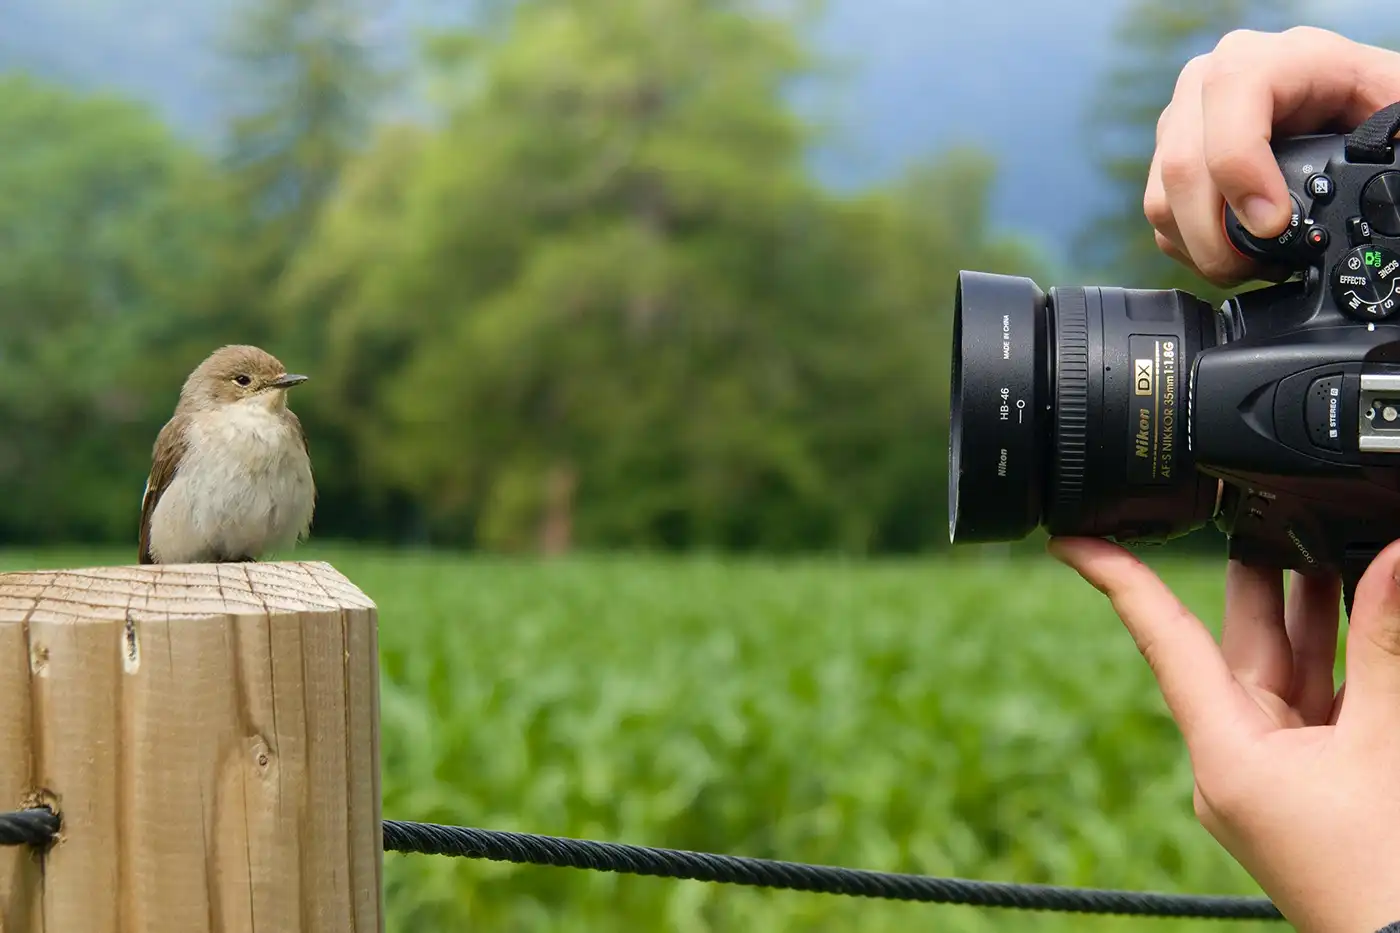 a camera taking a photo of a small bird